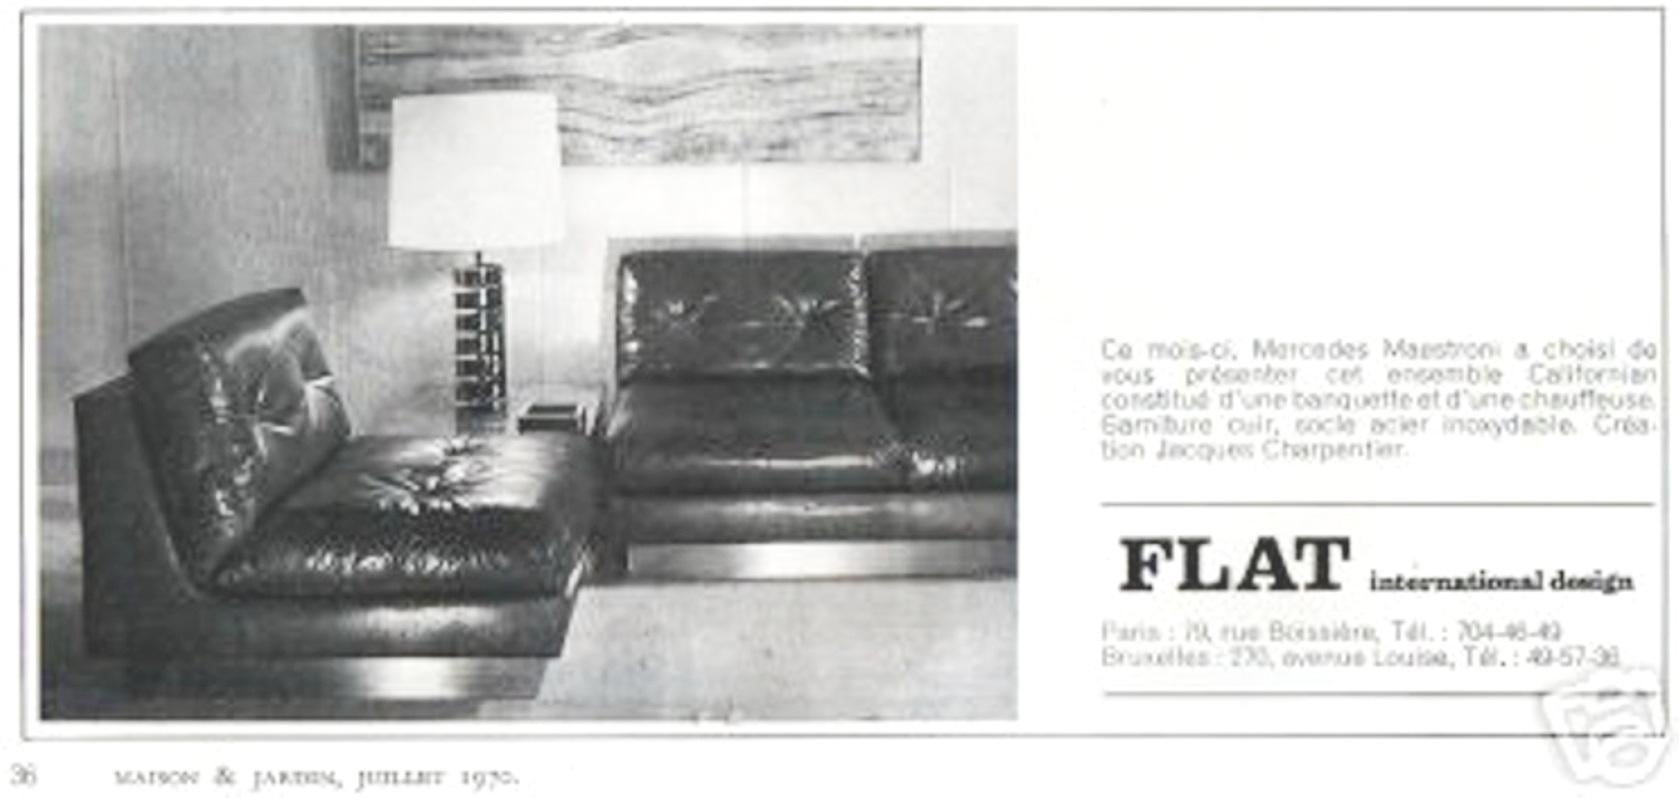 French Pair of Two Seat Mohair 'California' Sofas, Jacques Charpentier, Paris, 1970 For Sale